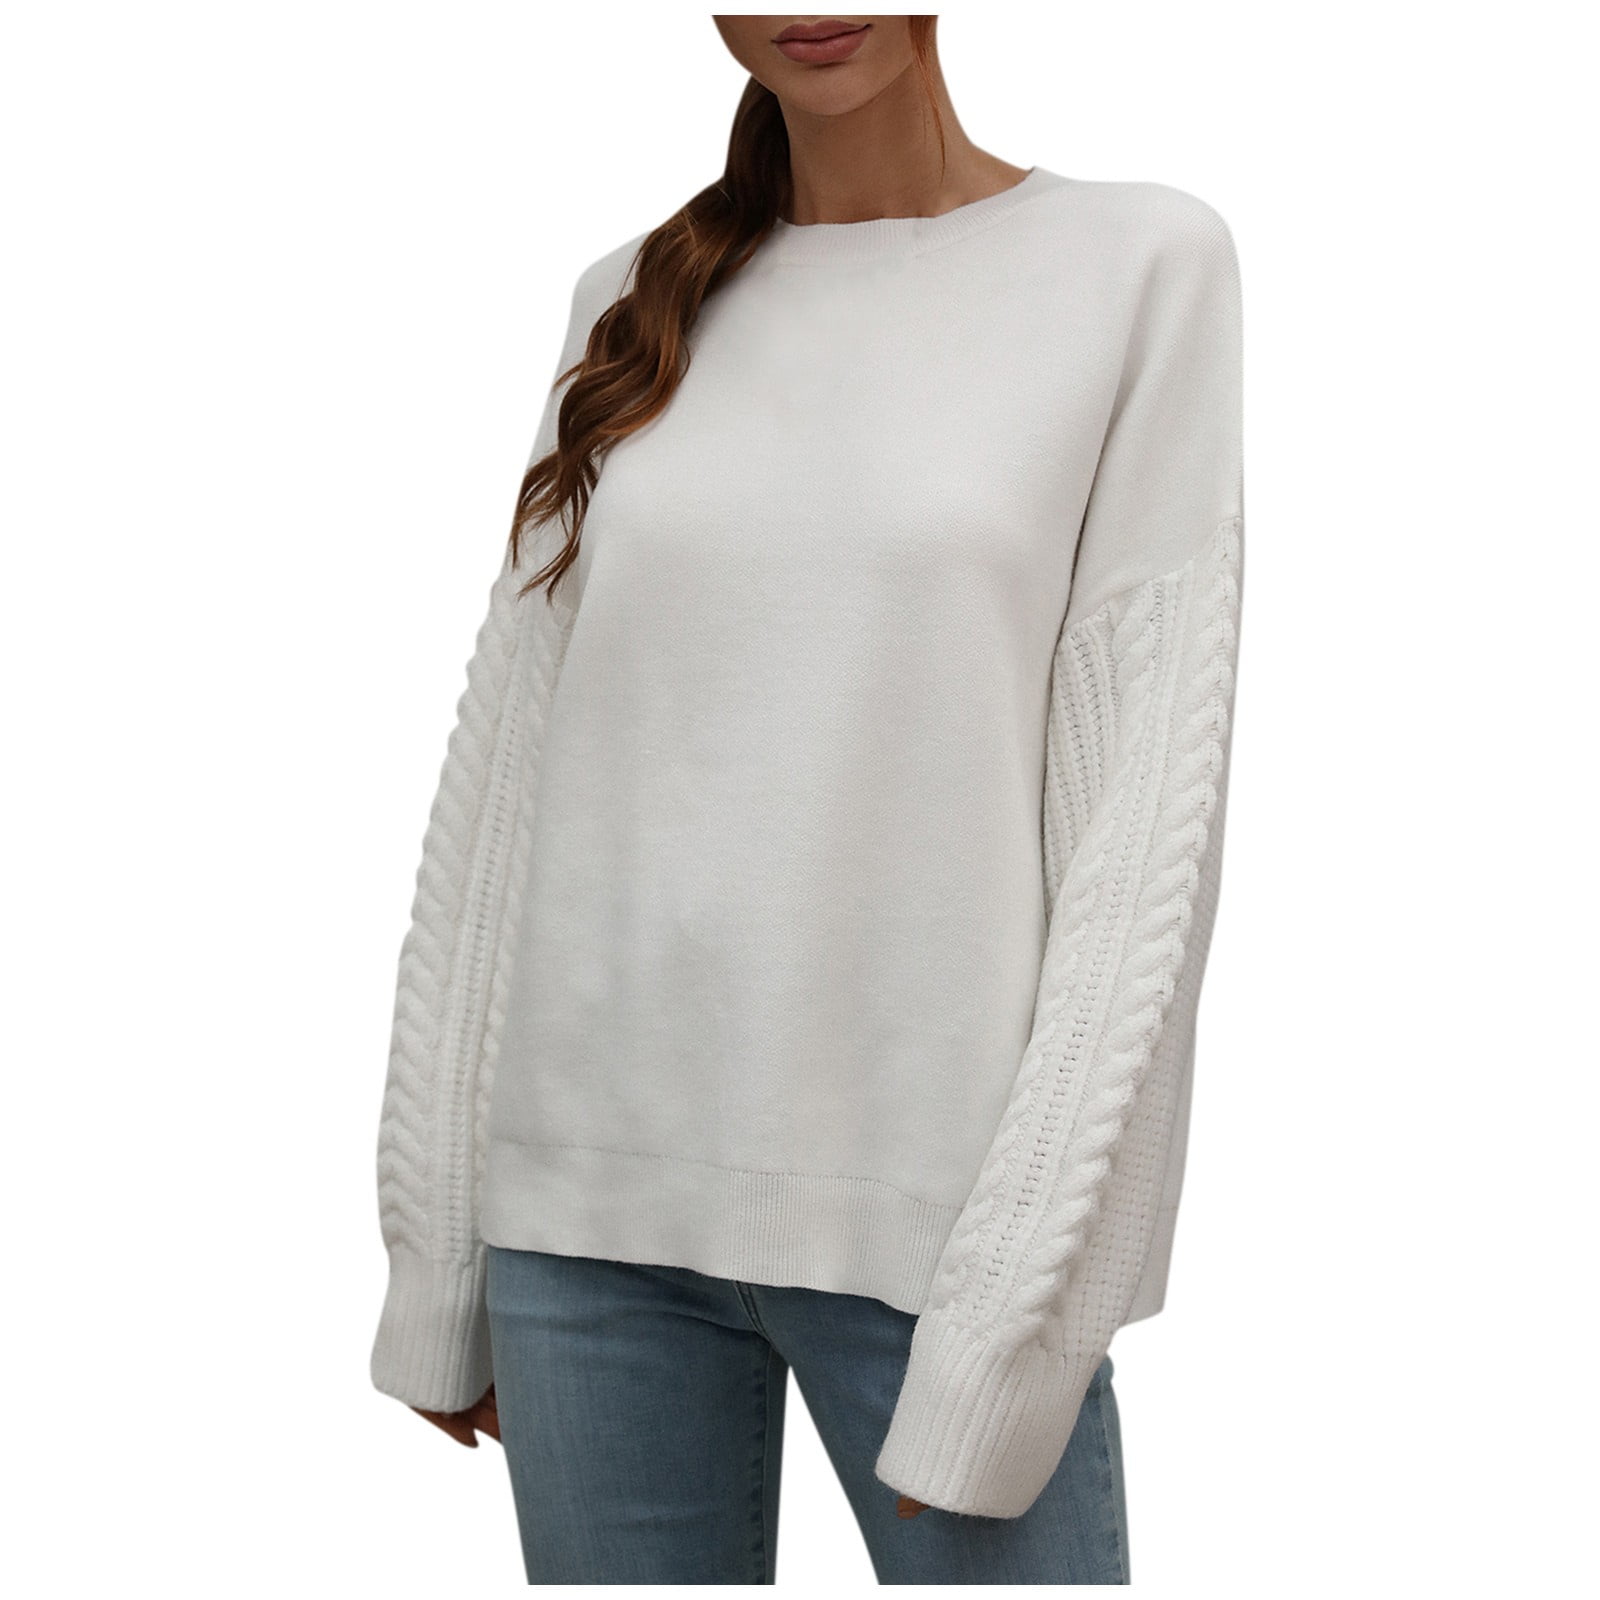 Women's Fall Clothes, Tunic Sweatshirts For Women Clothing Long Thick  Sweaters Winter Women's Autumn And Solid Round Neck Sleeve Knit Sweater  Pullover